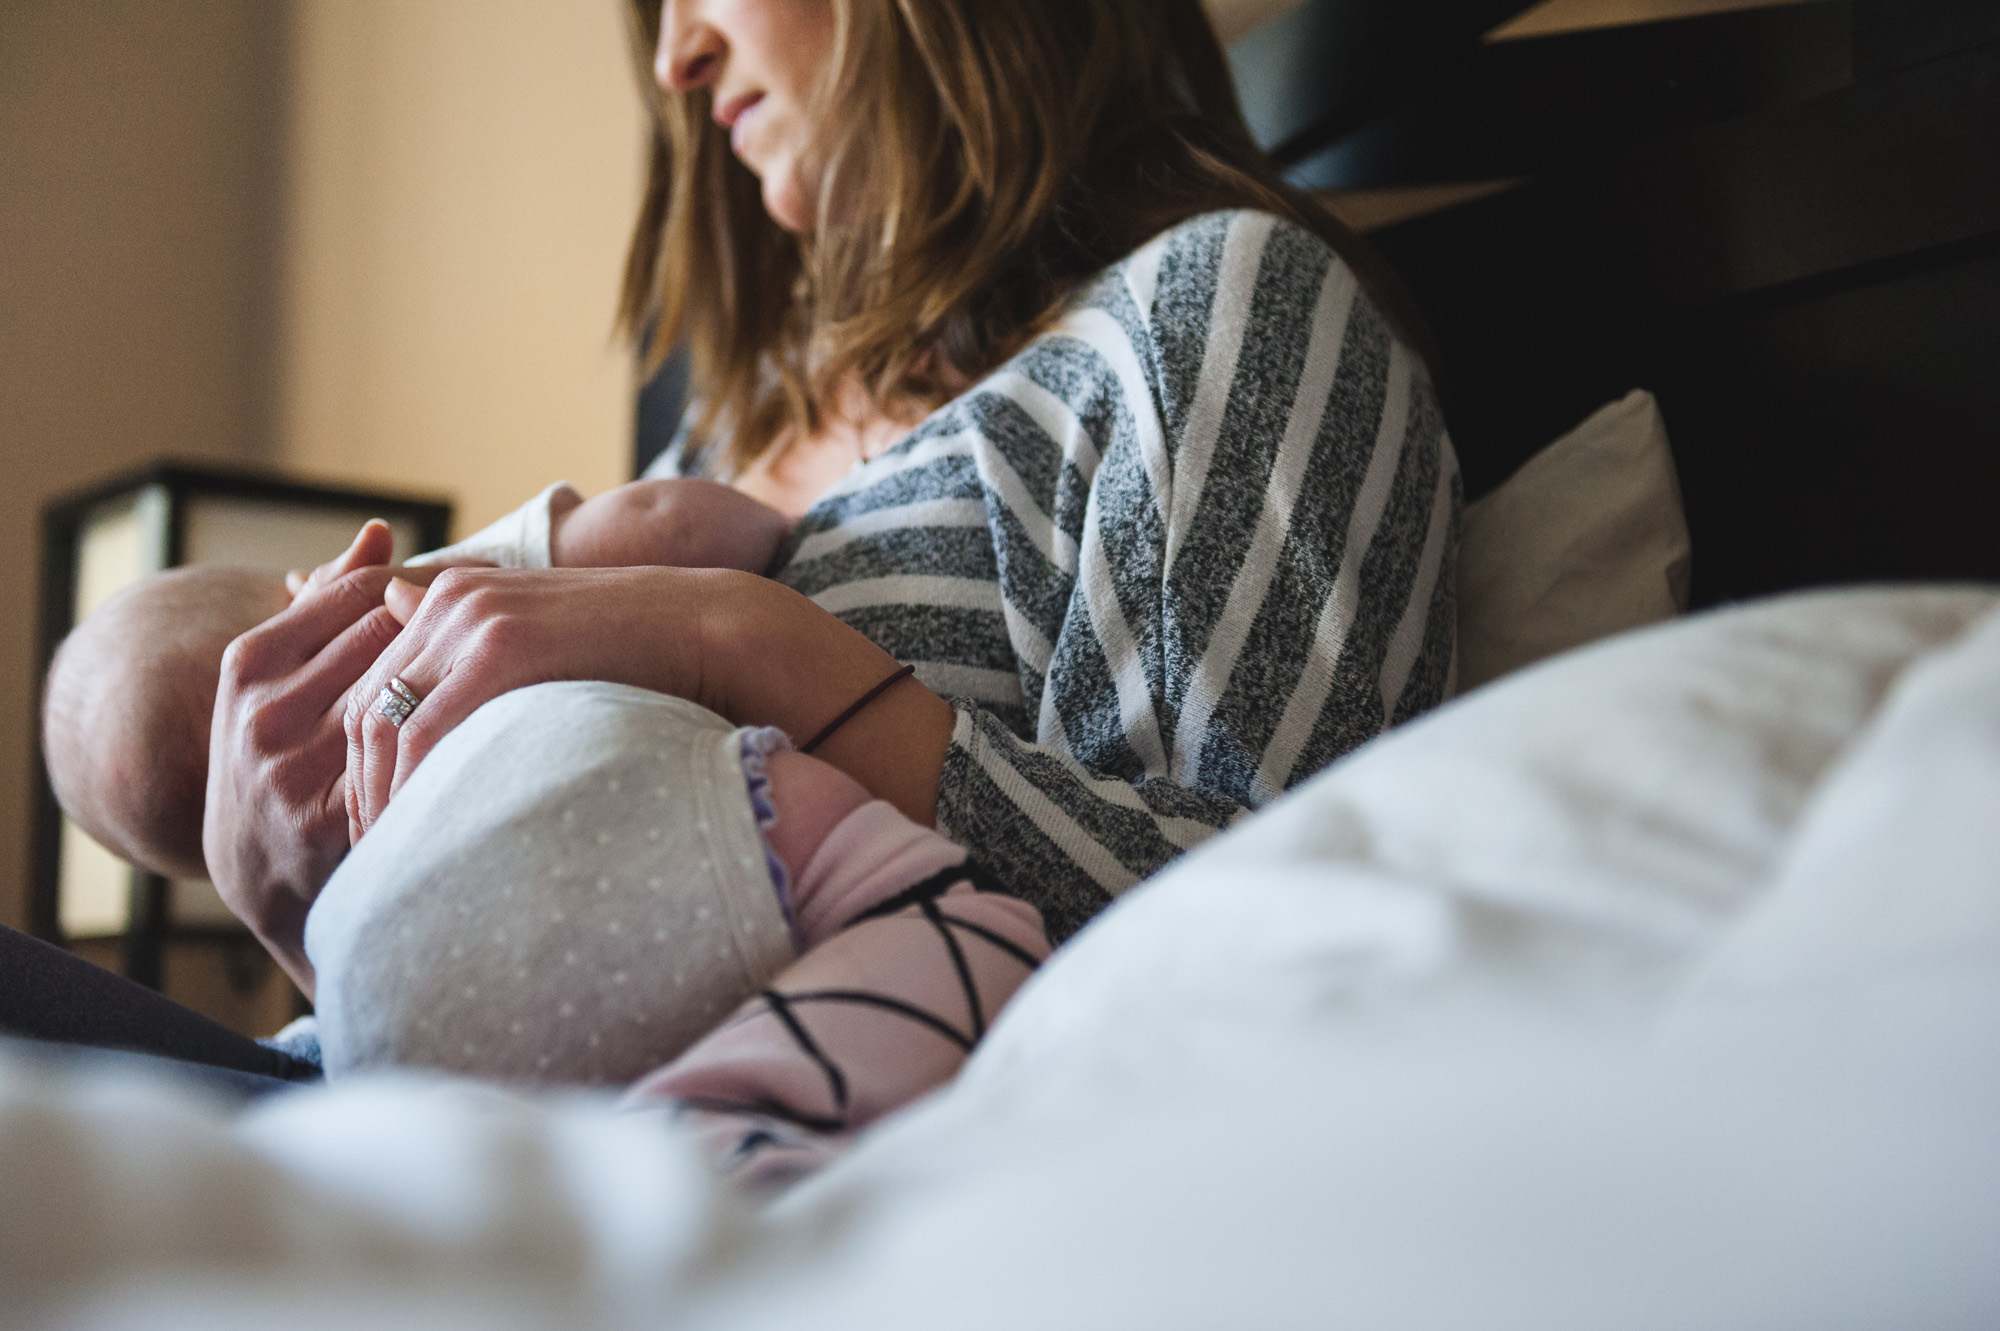 A mother breastfeeds her baby on a bed